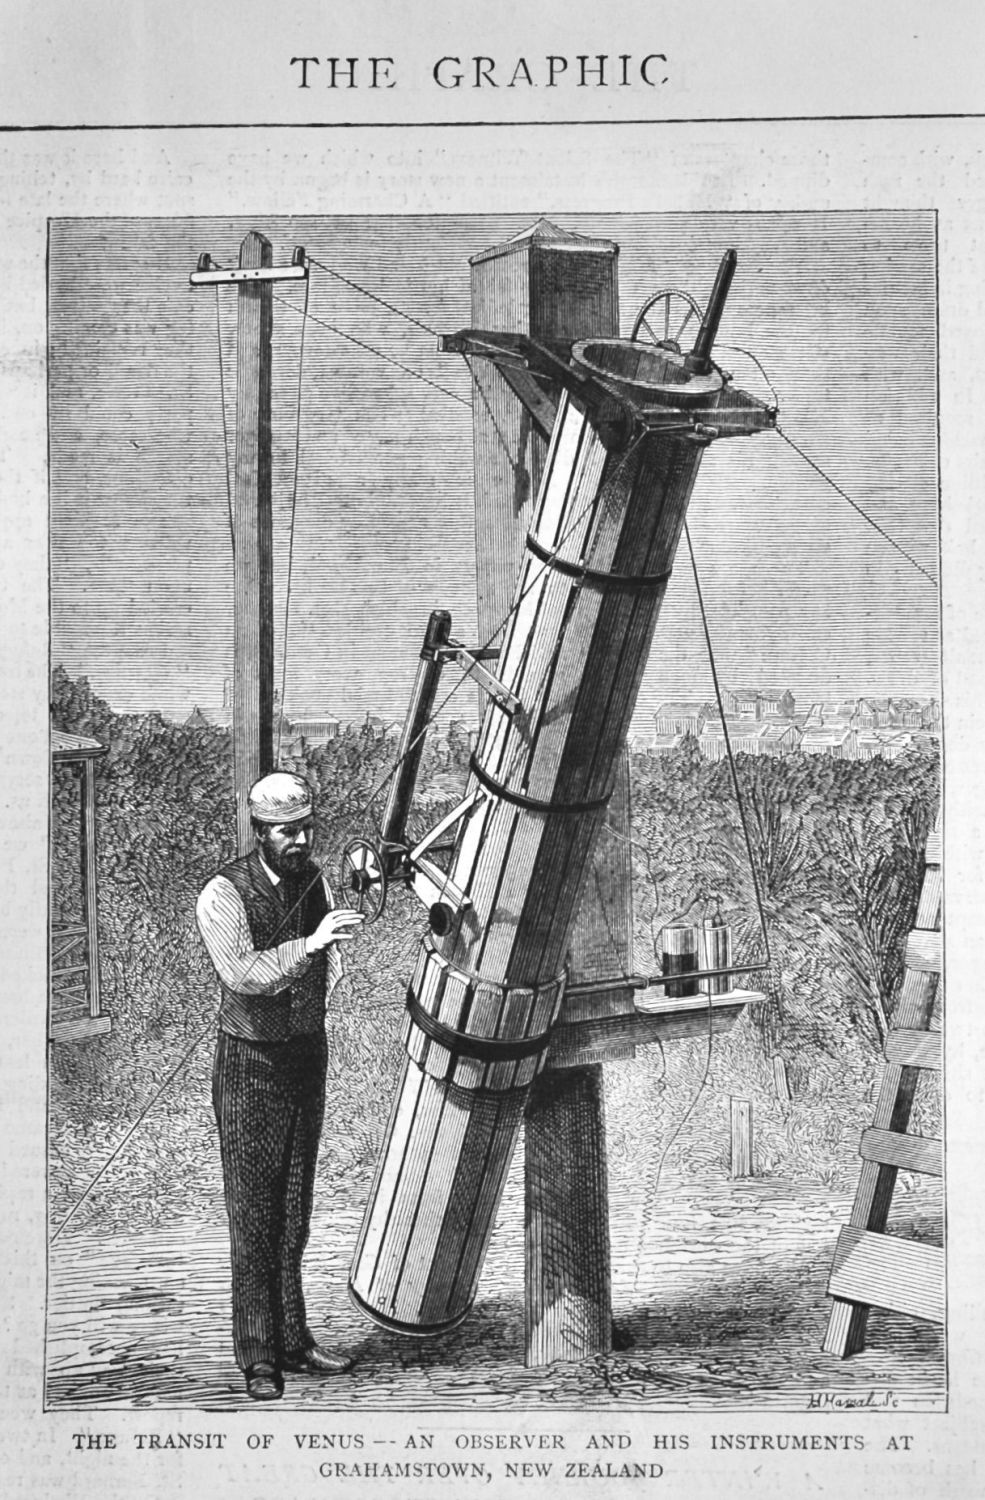 The Transit of Venus -  An Observer and His Instruments at Grahamstown, New